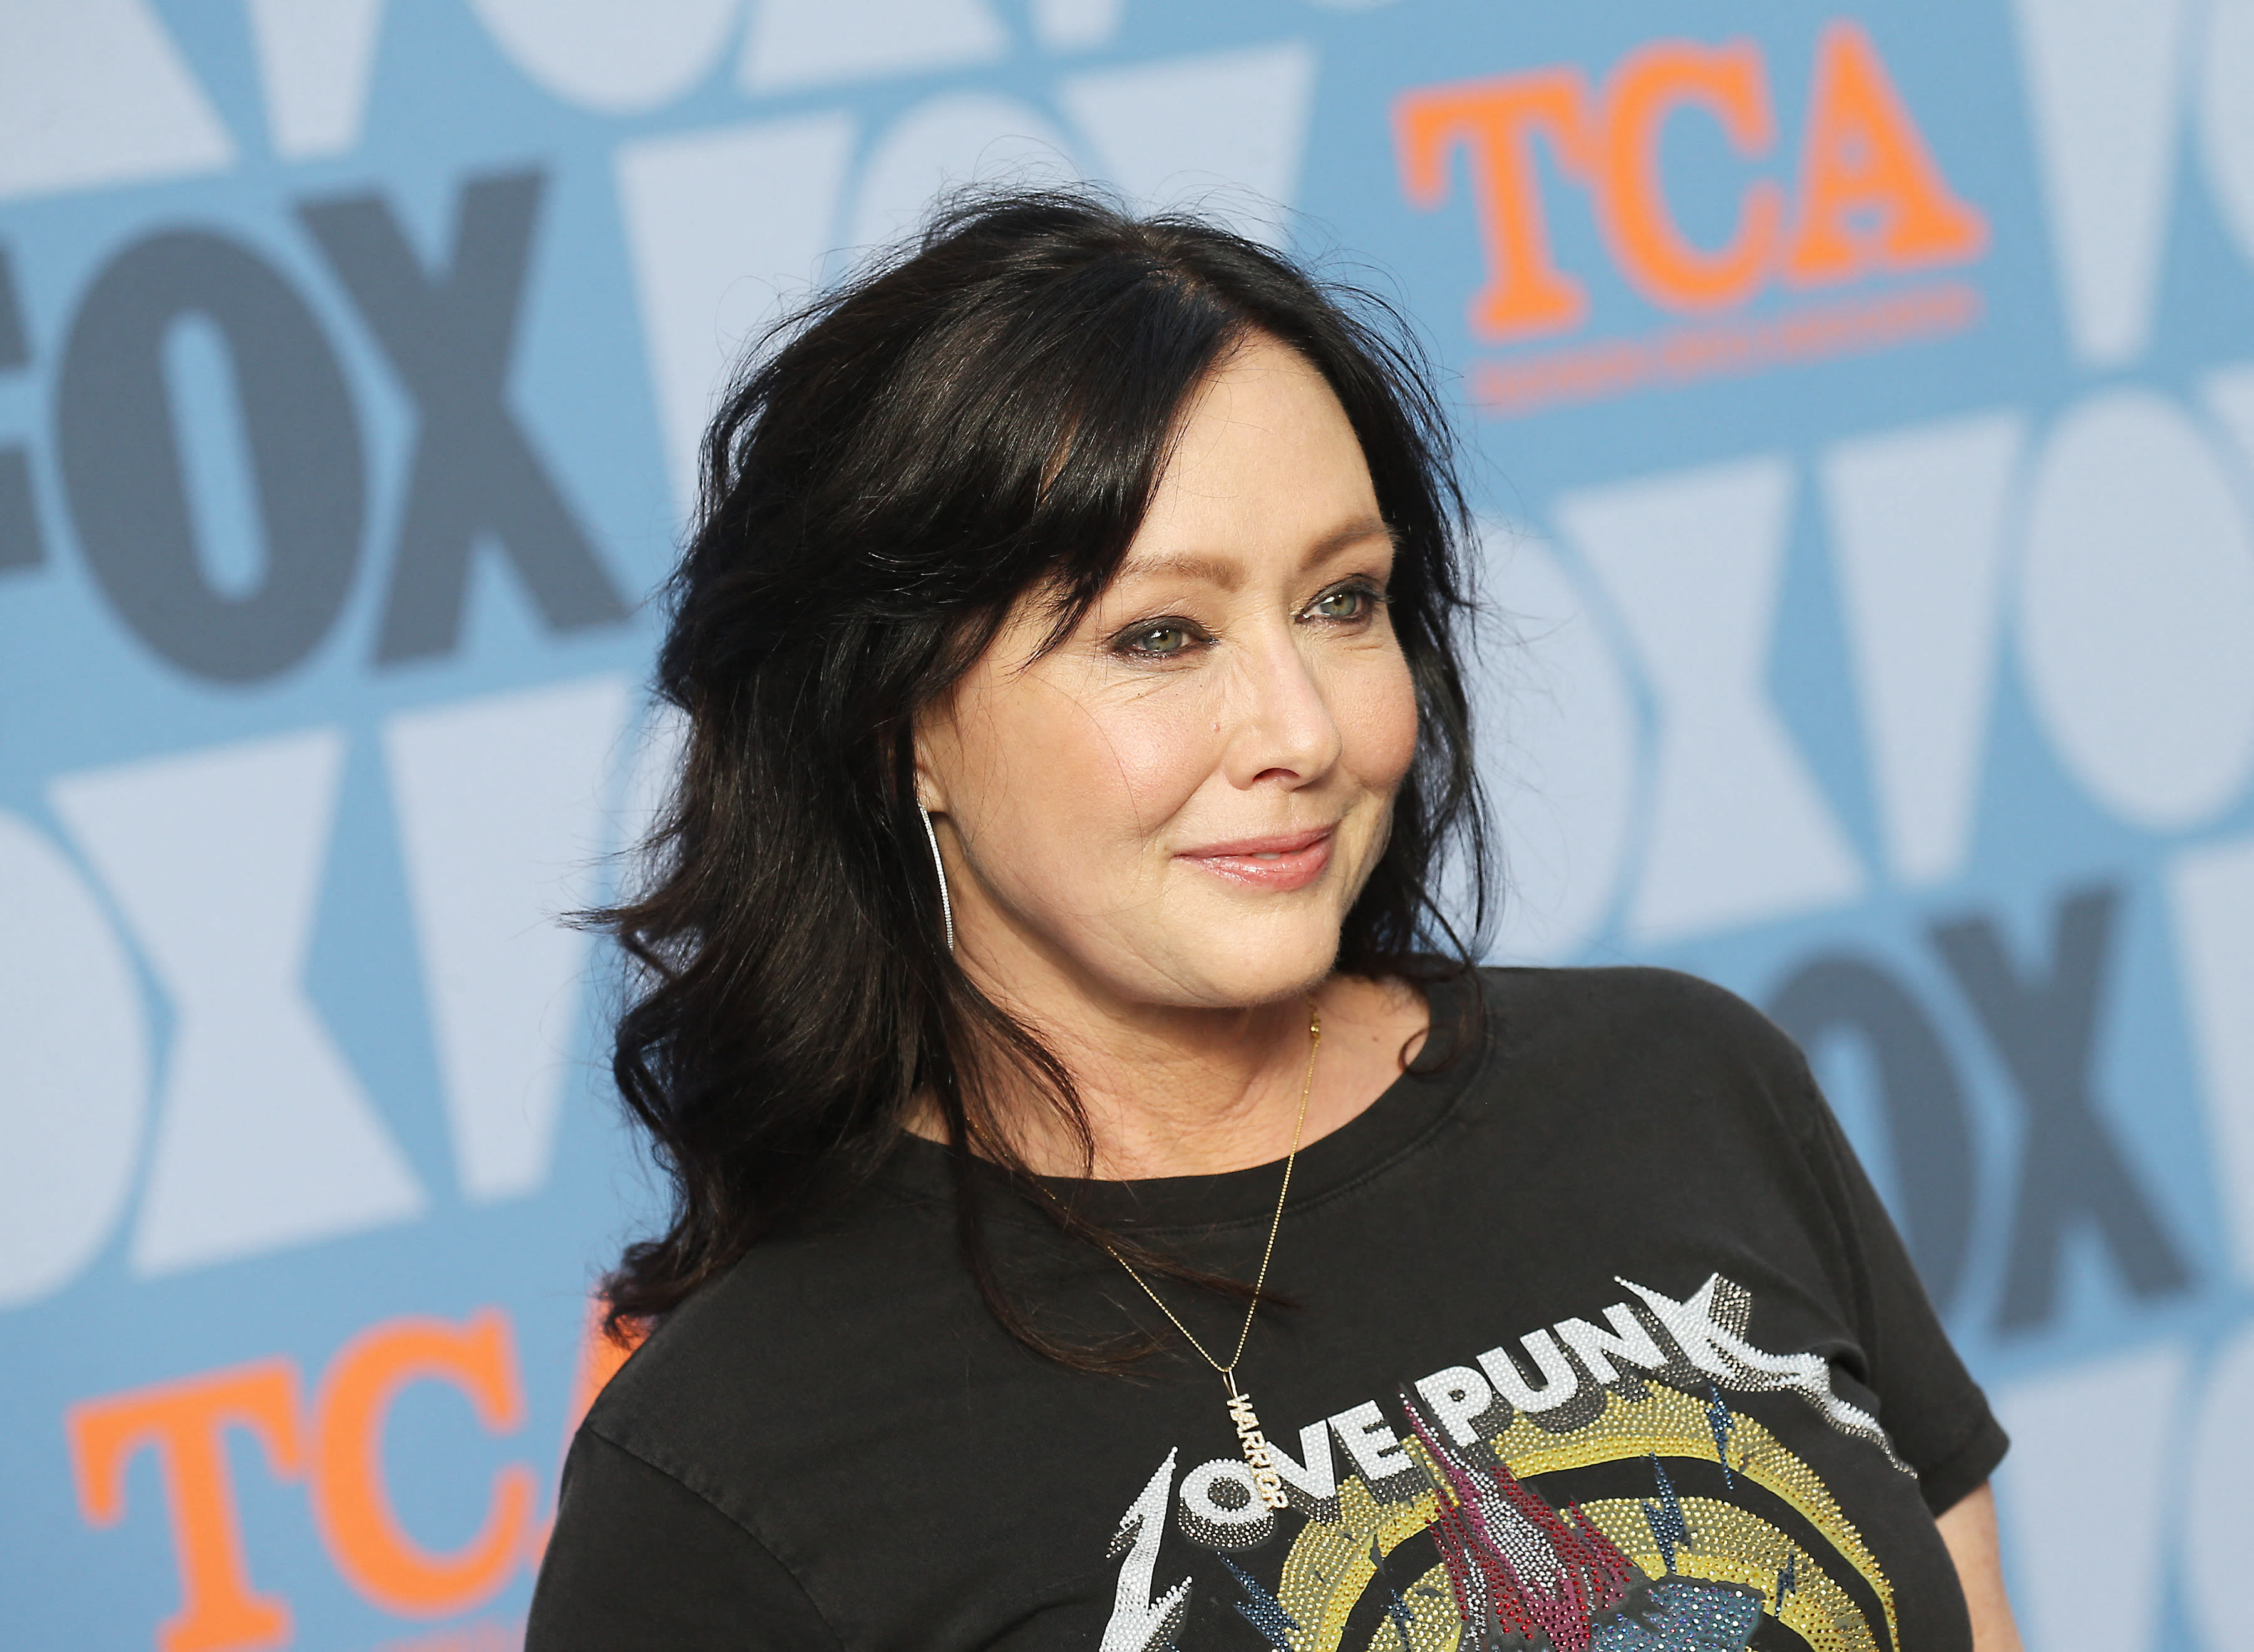 Shannen Doherty's final moments revealed by doctor